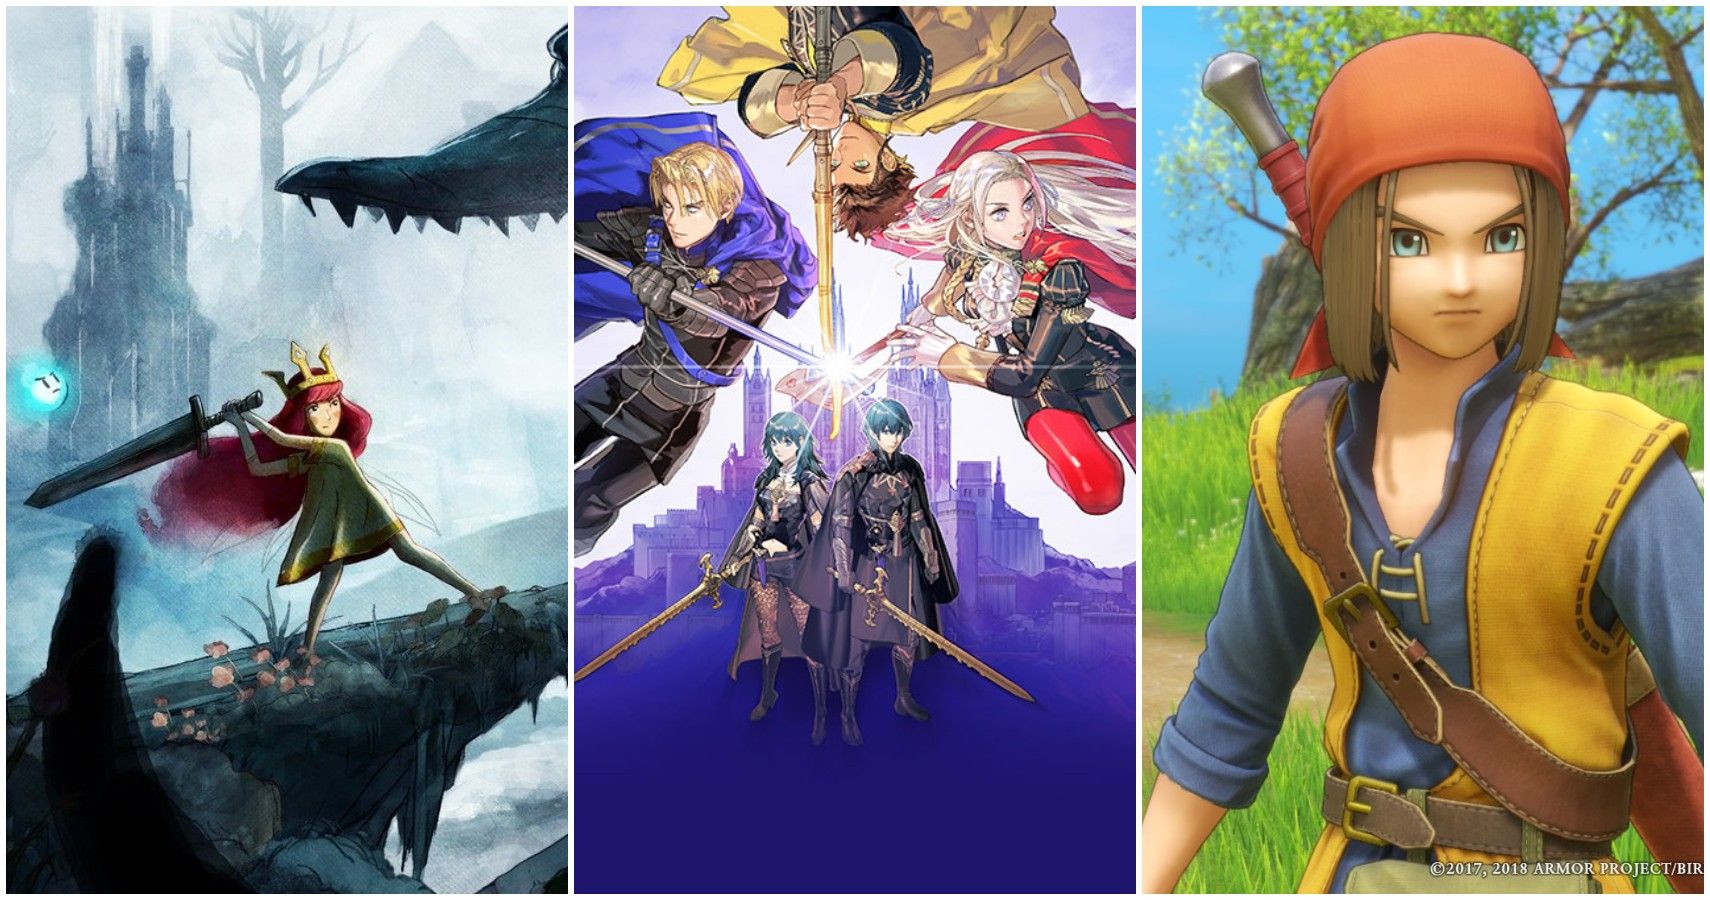 The Best Turn Based RPGs Of The Decade Ranked According To Metacritic